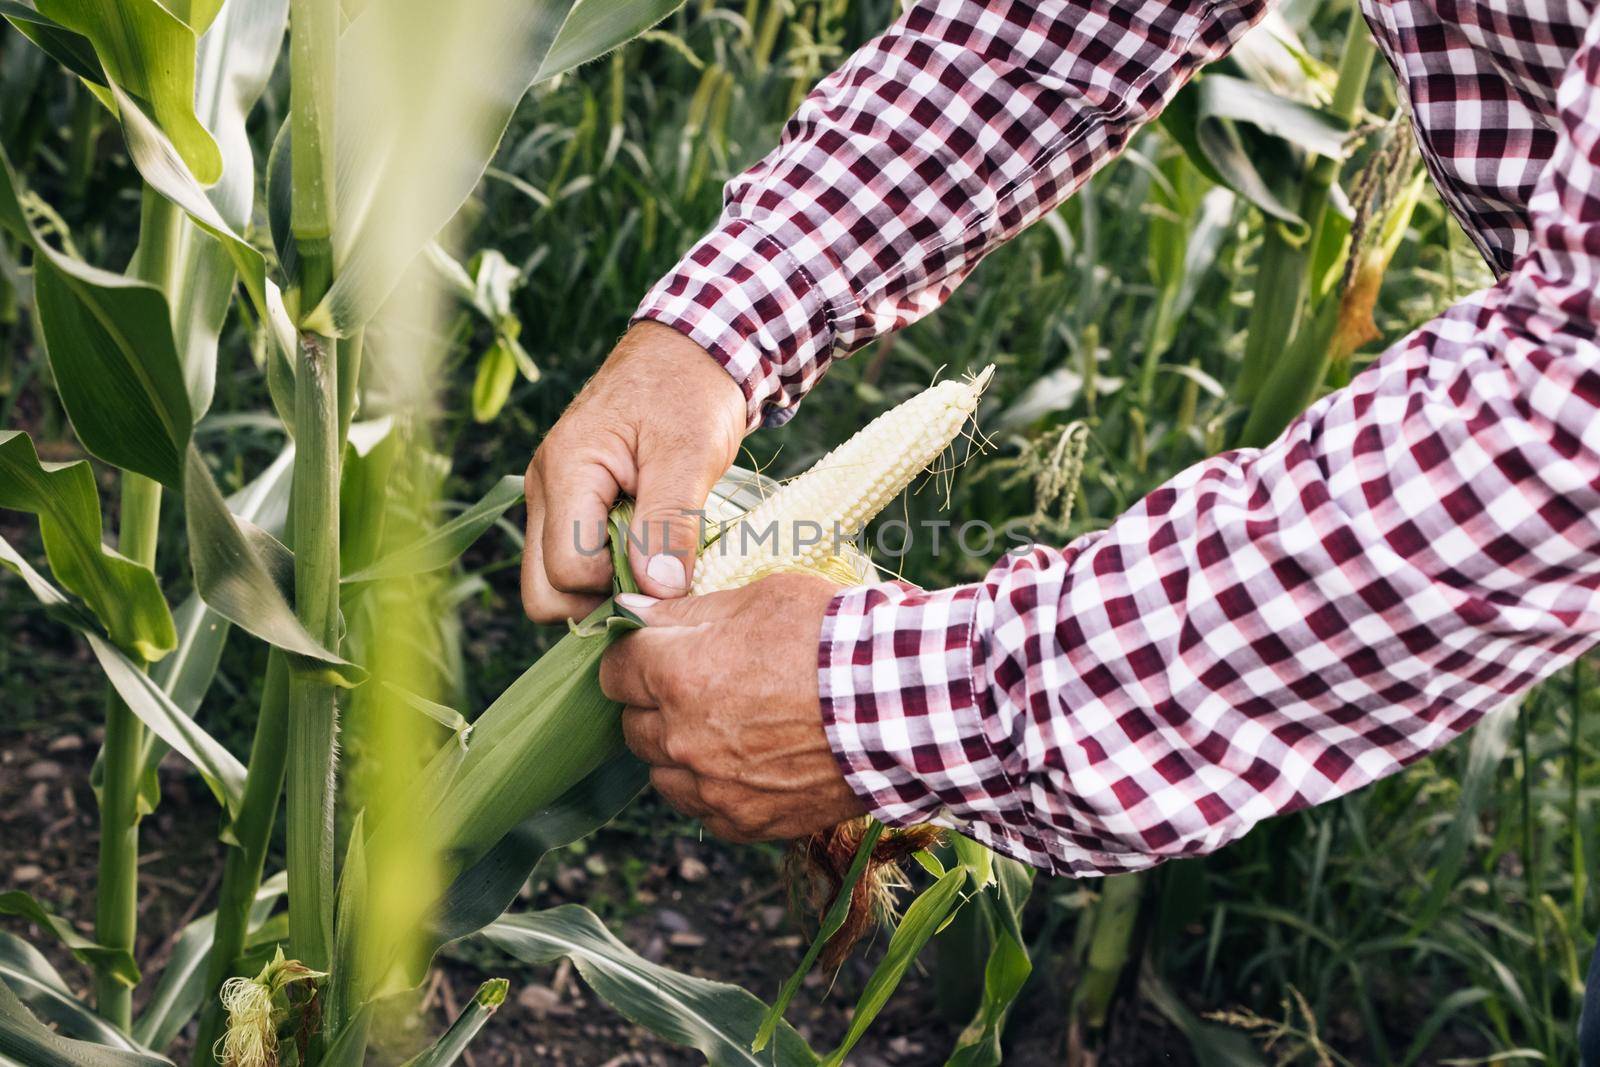 Agriculture Corn Farm Harvest. Golden Corn Growing. Ecological Farmer, Organic Horticulture, Producing Food And Crops, Organic Farming, Agricultural Land Area. Farmers Work Corn Field. Corn Harvest.